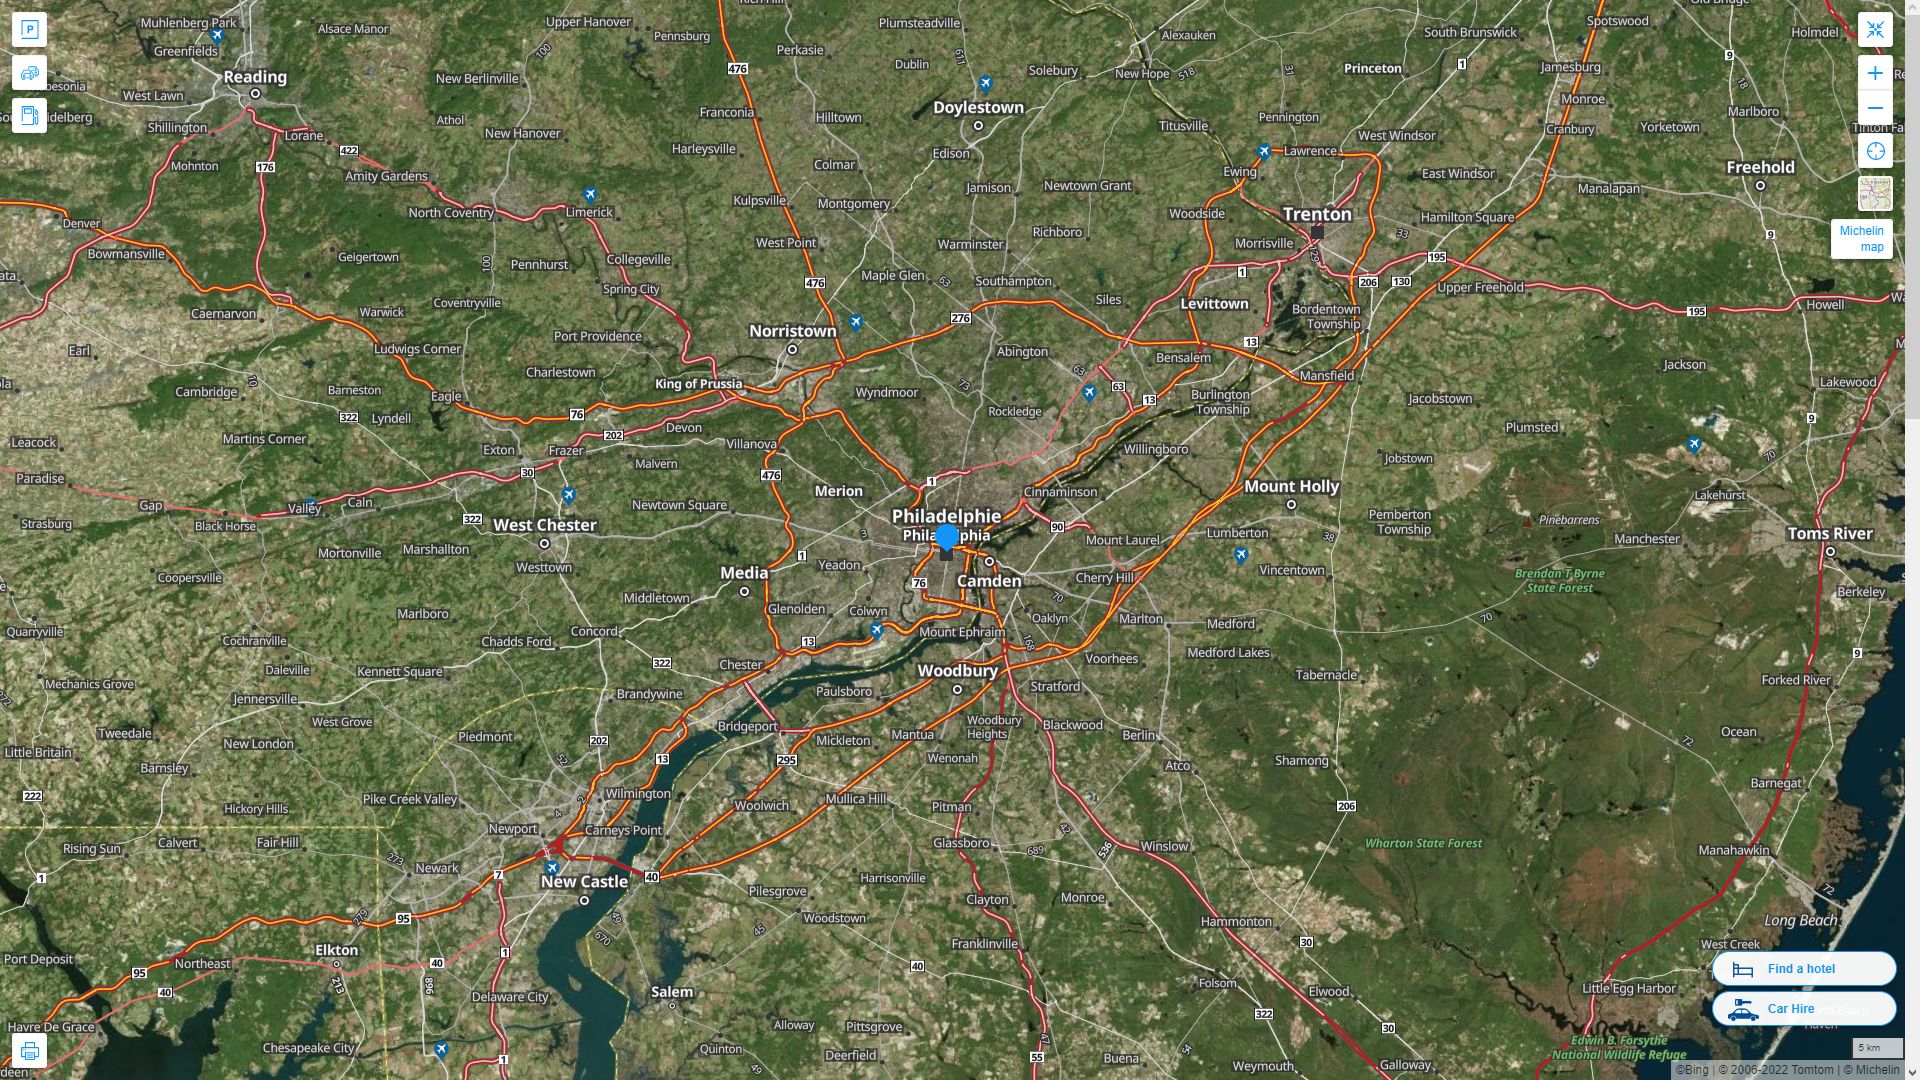 Philadelphia Pennsylvania Highway and Road Map with Satellite View